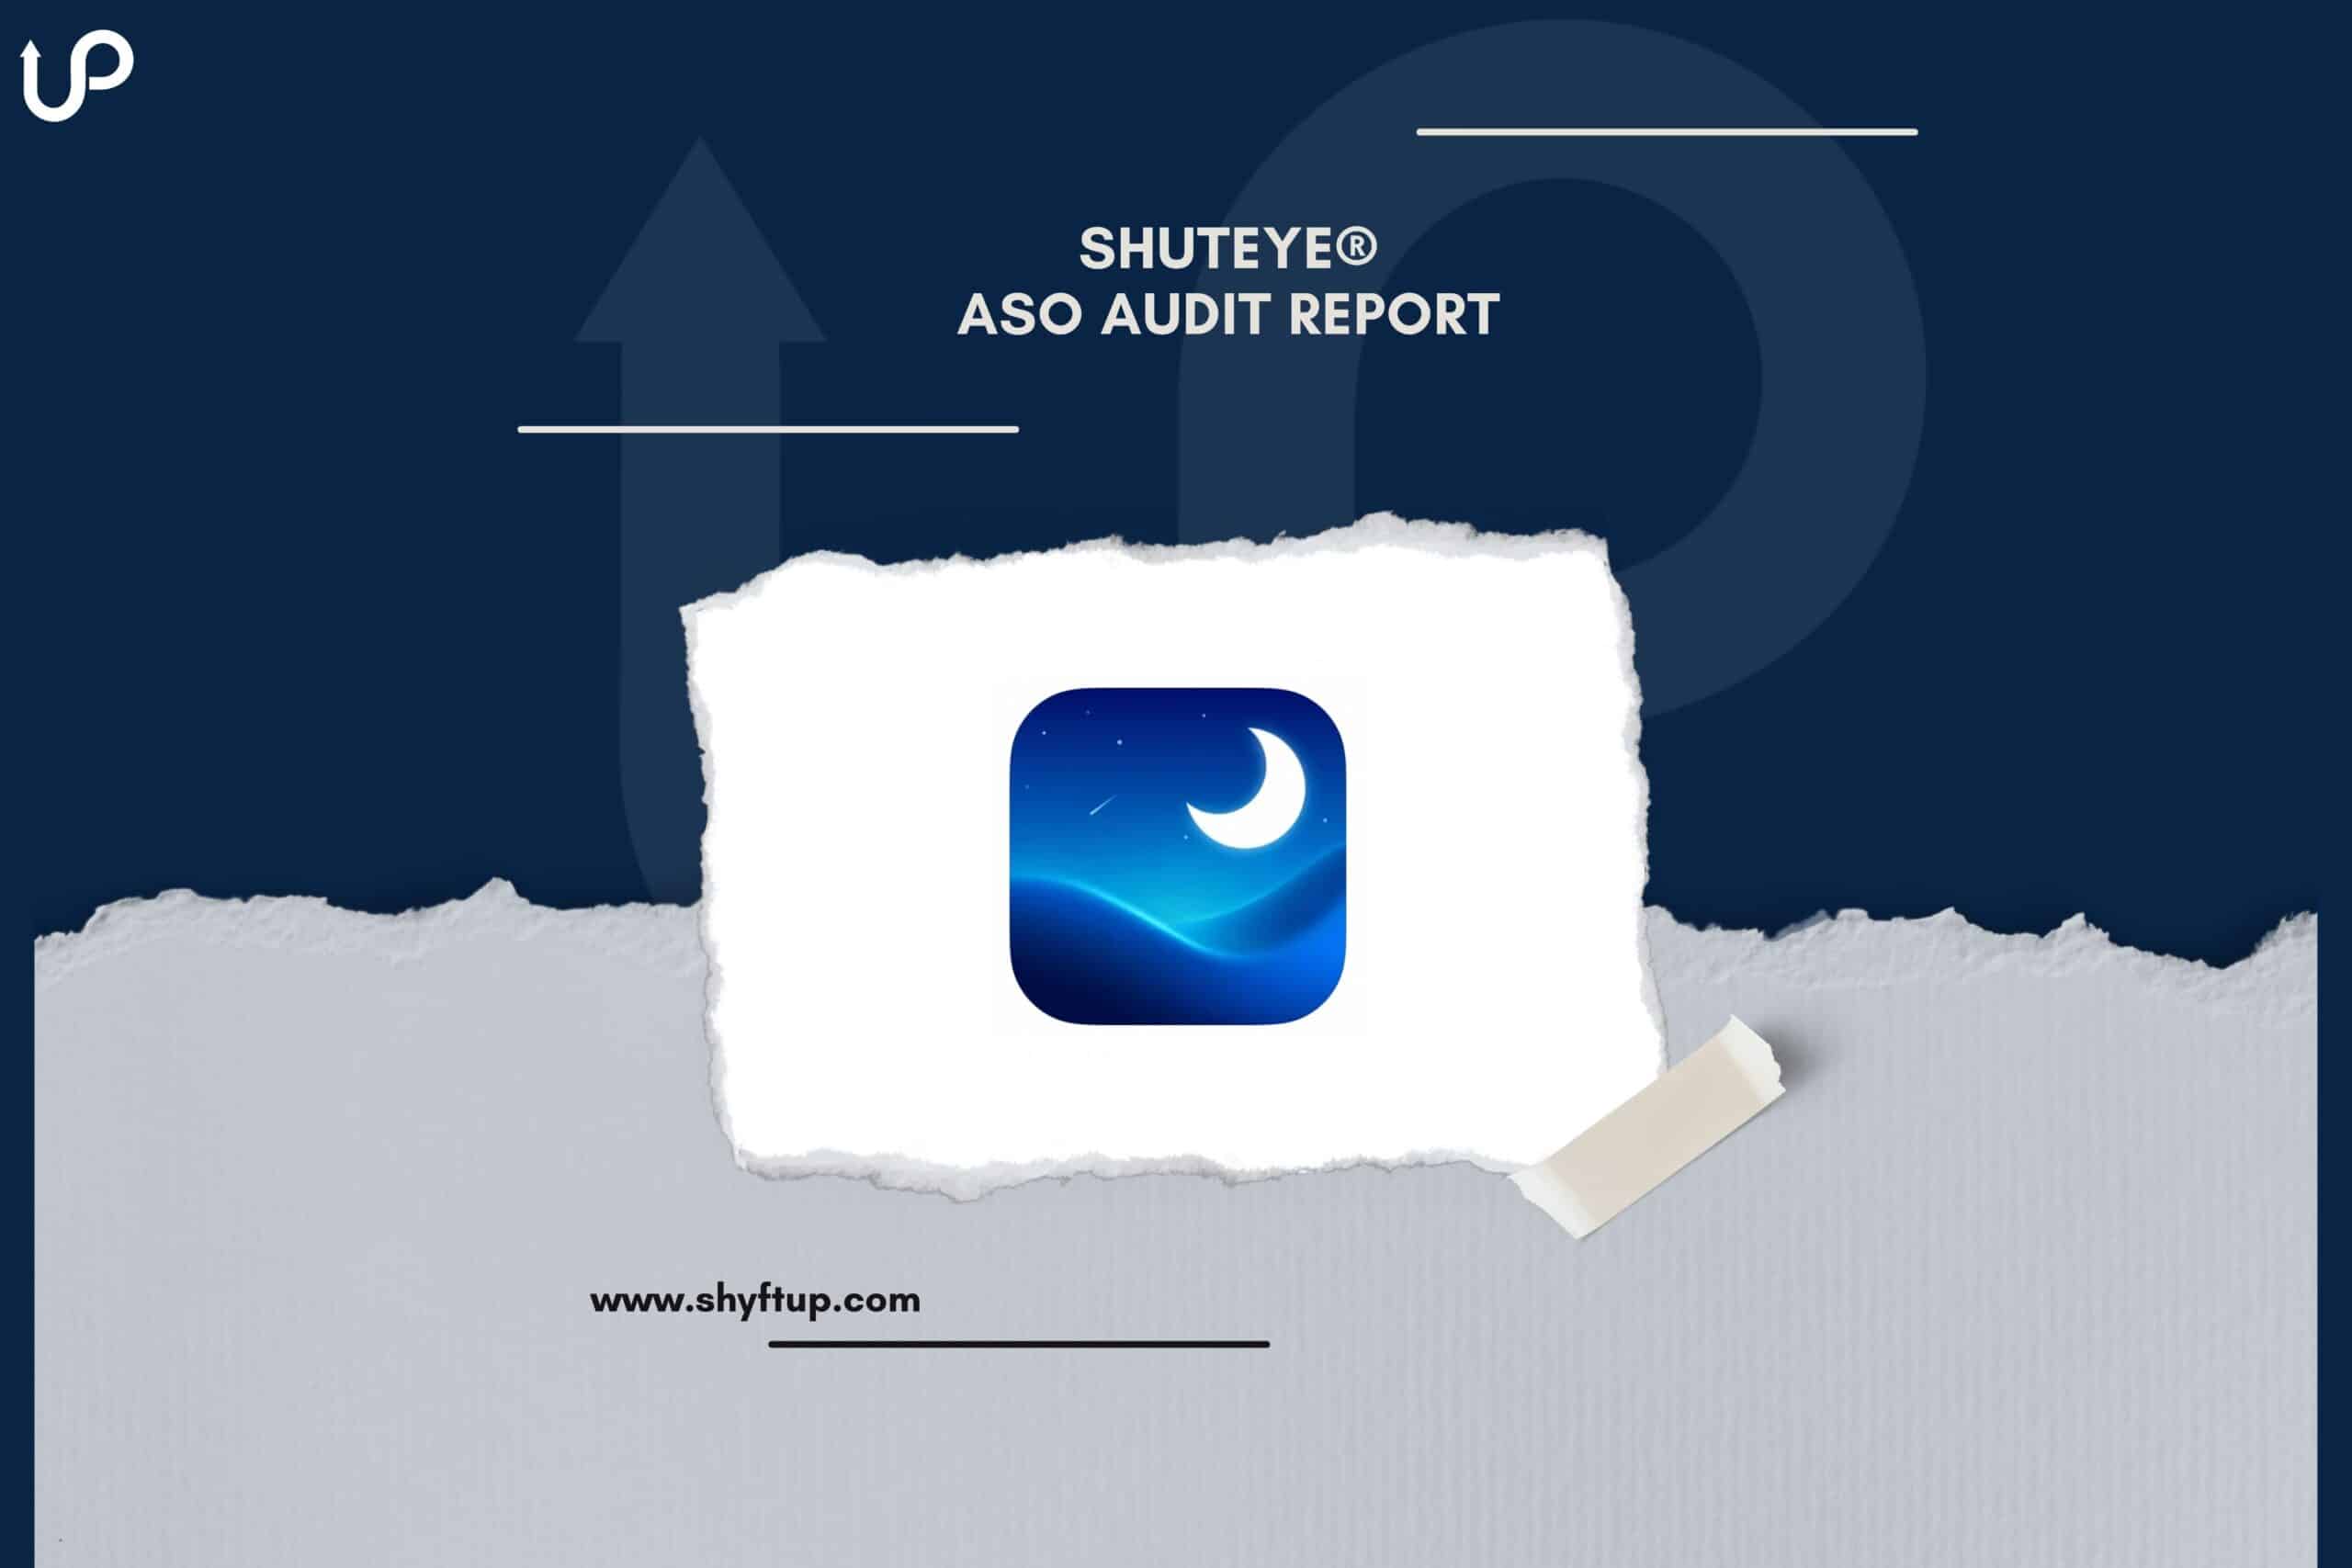 SHEIN ASO Audit Report with ChatGPT